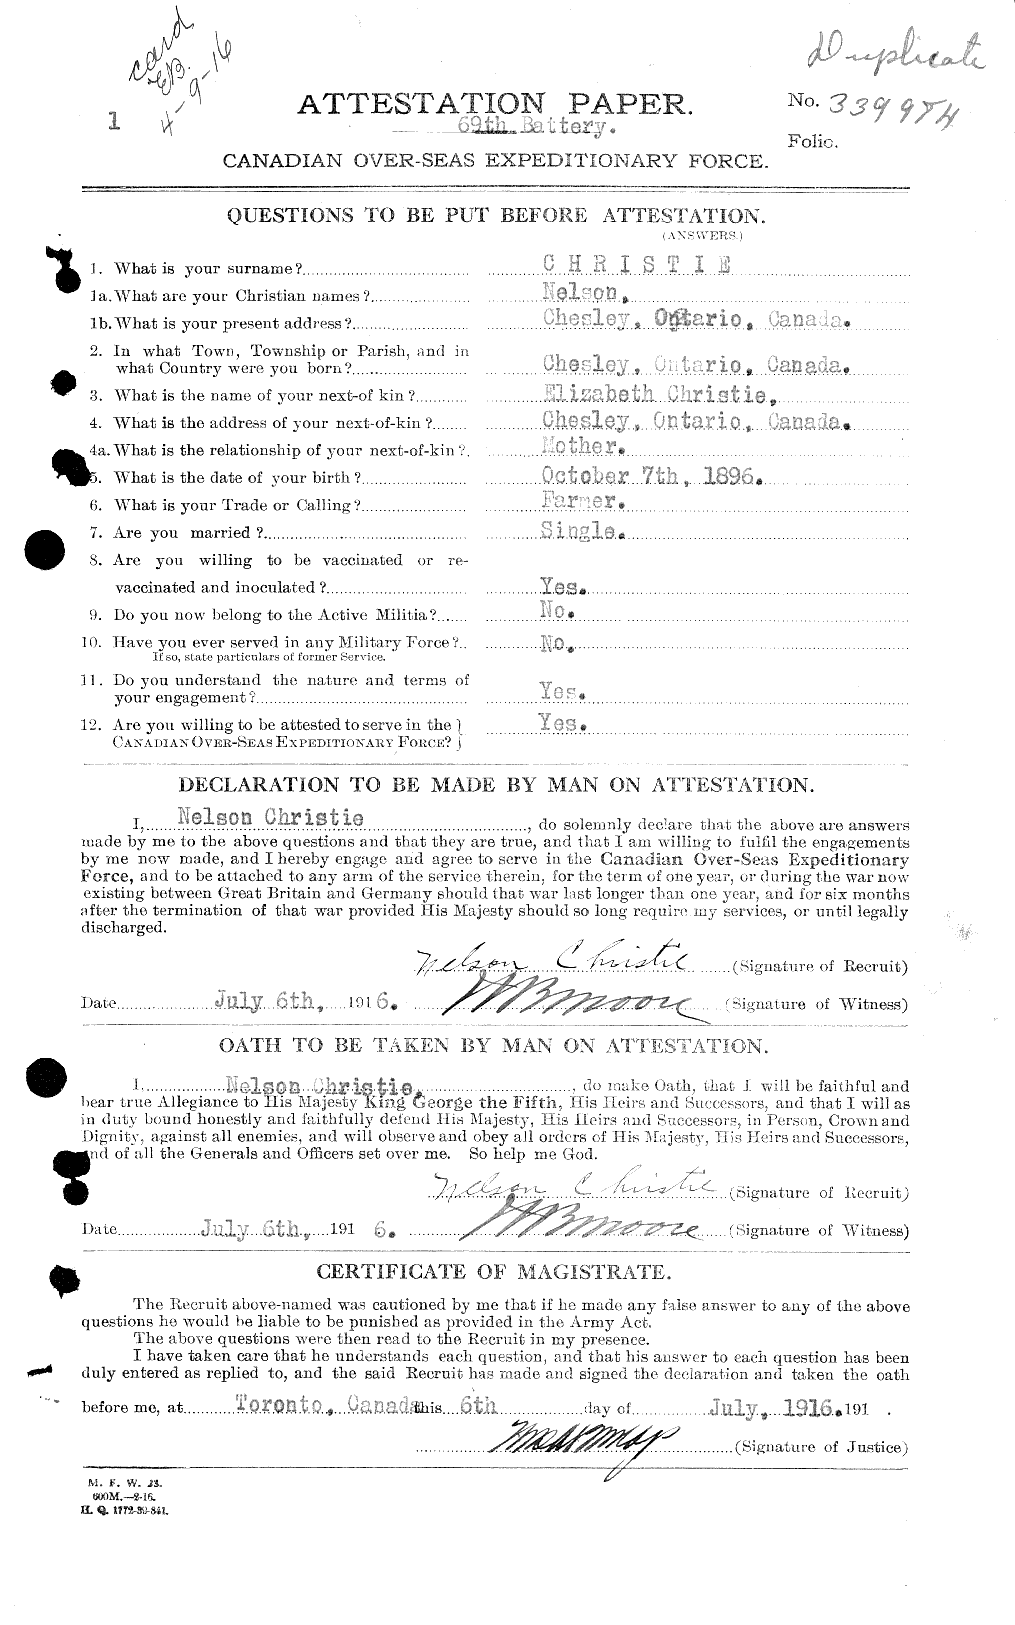 Personnel Records of the First World War - CEF 022035a